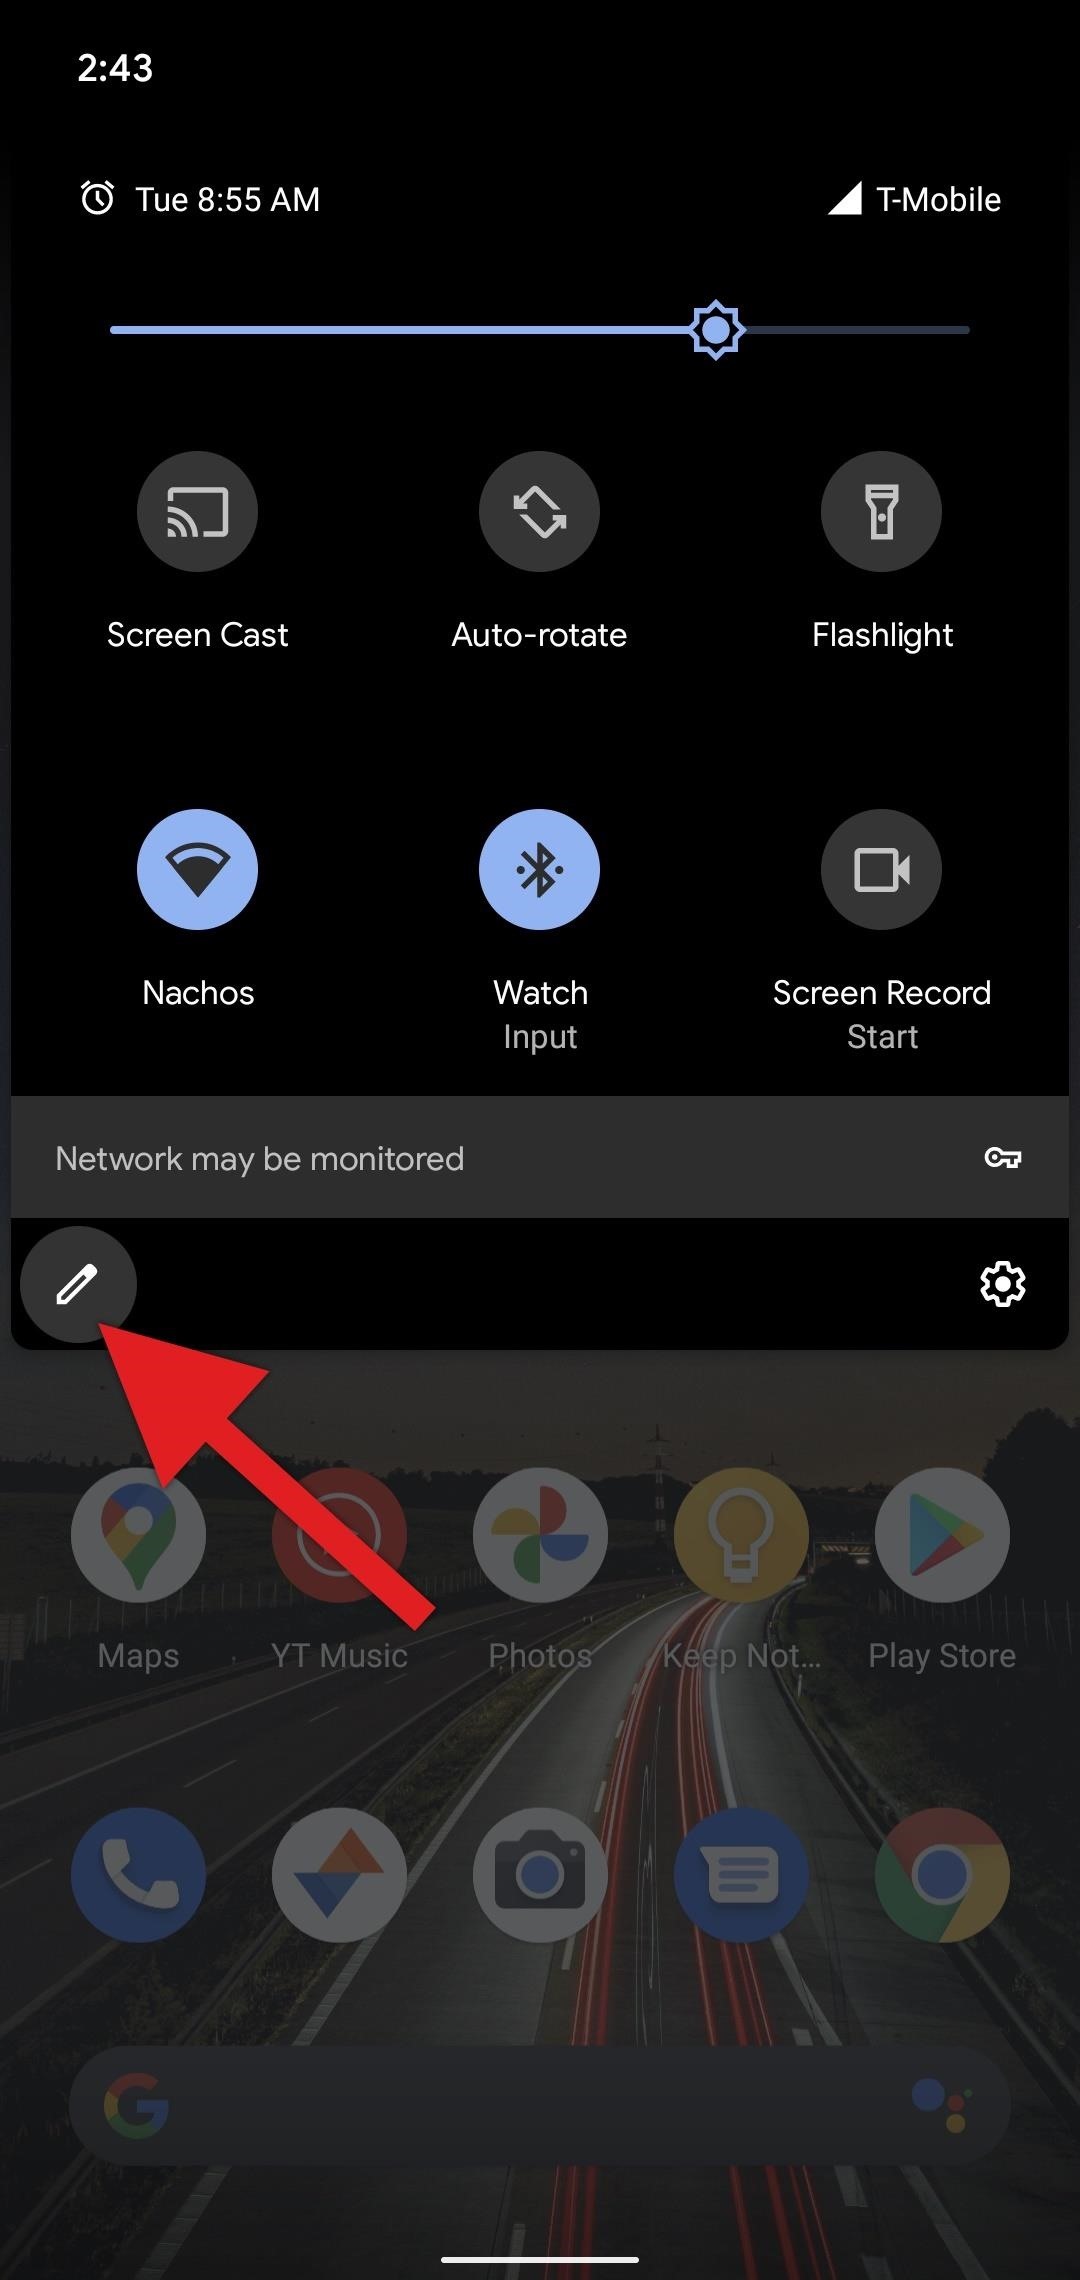 How to Use Android's New Nearby Share Feature to 'AirDrop' Files & Links to Other Devices